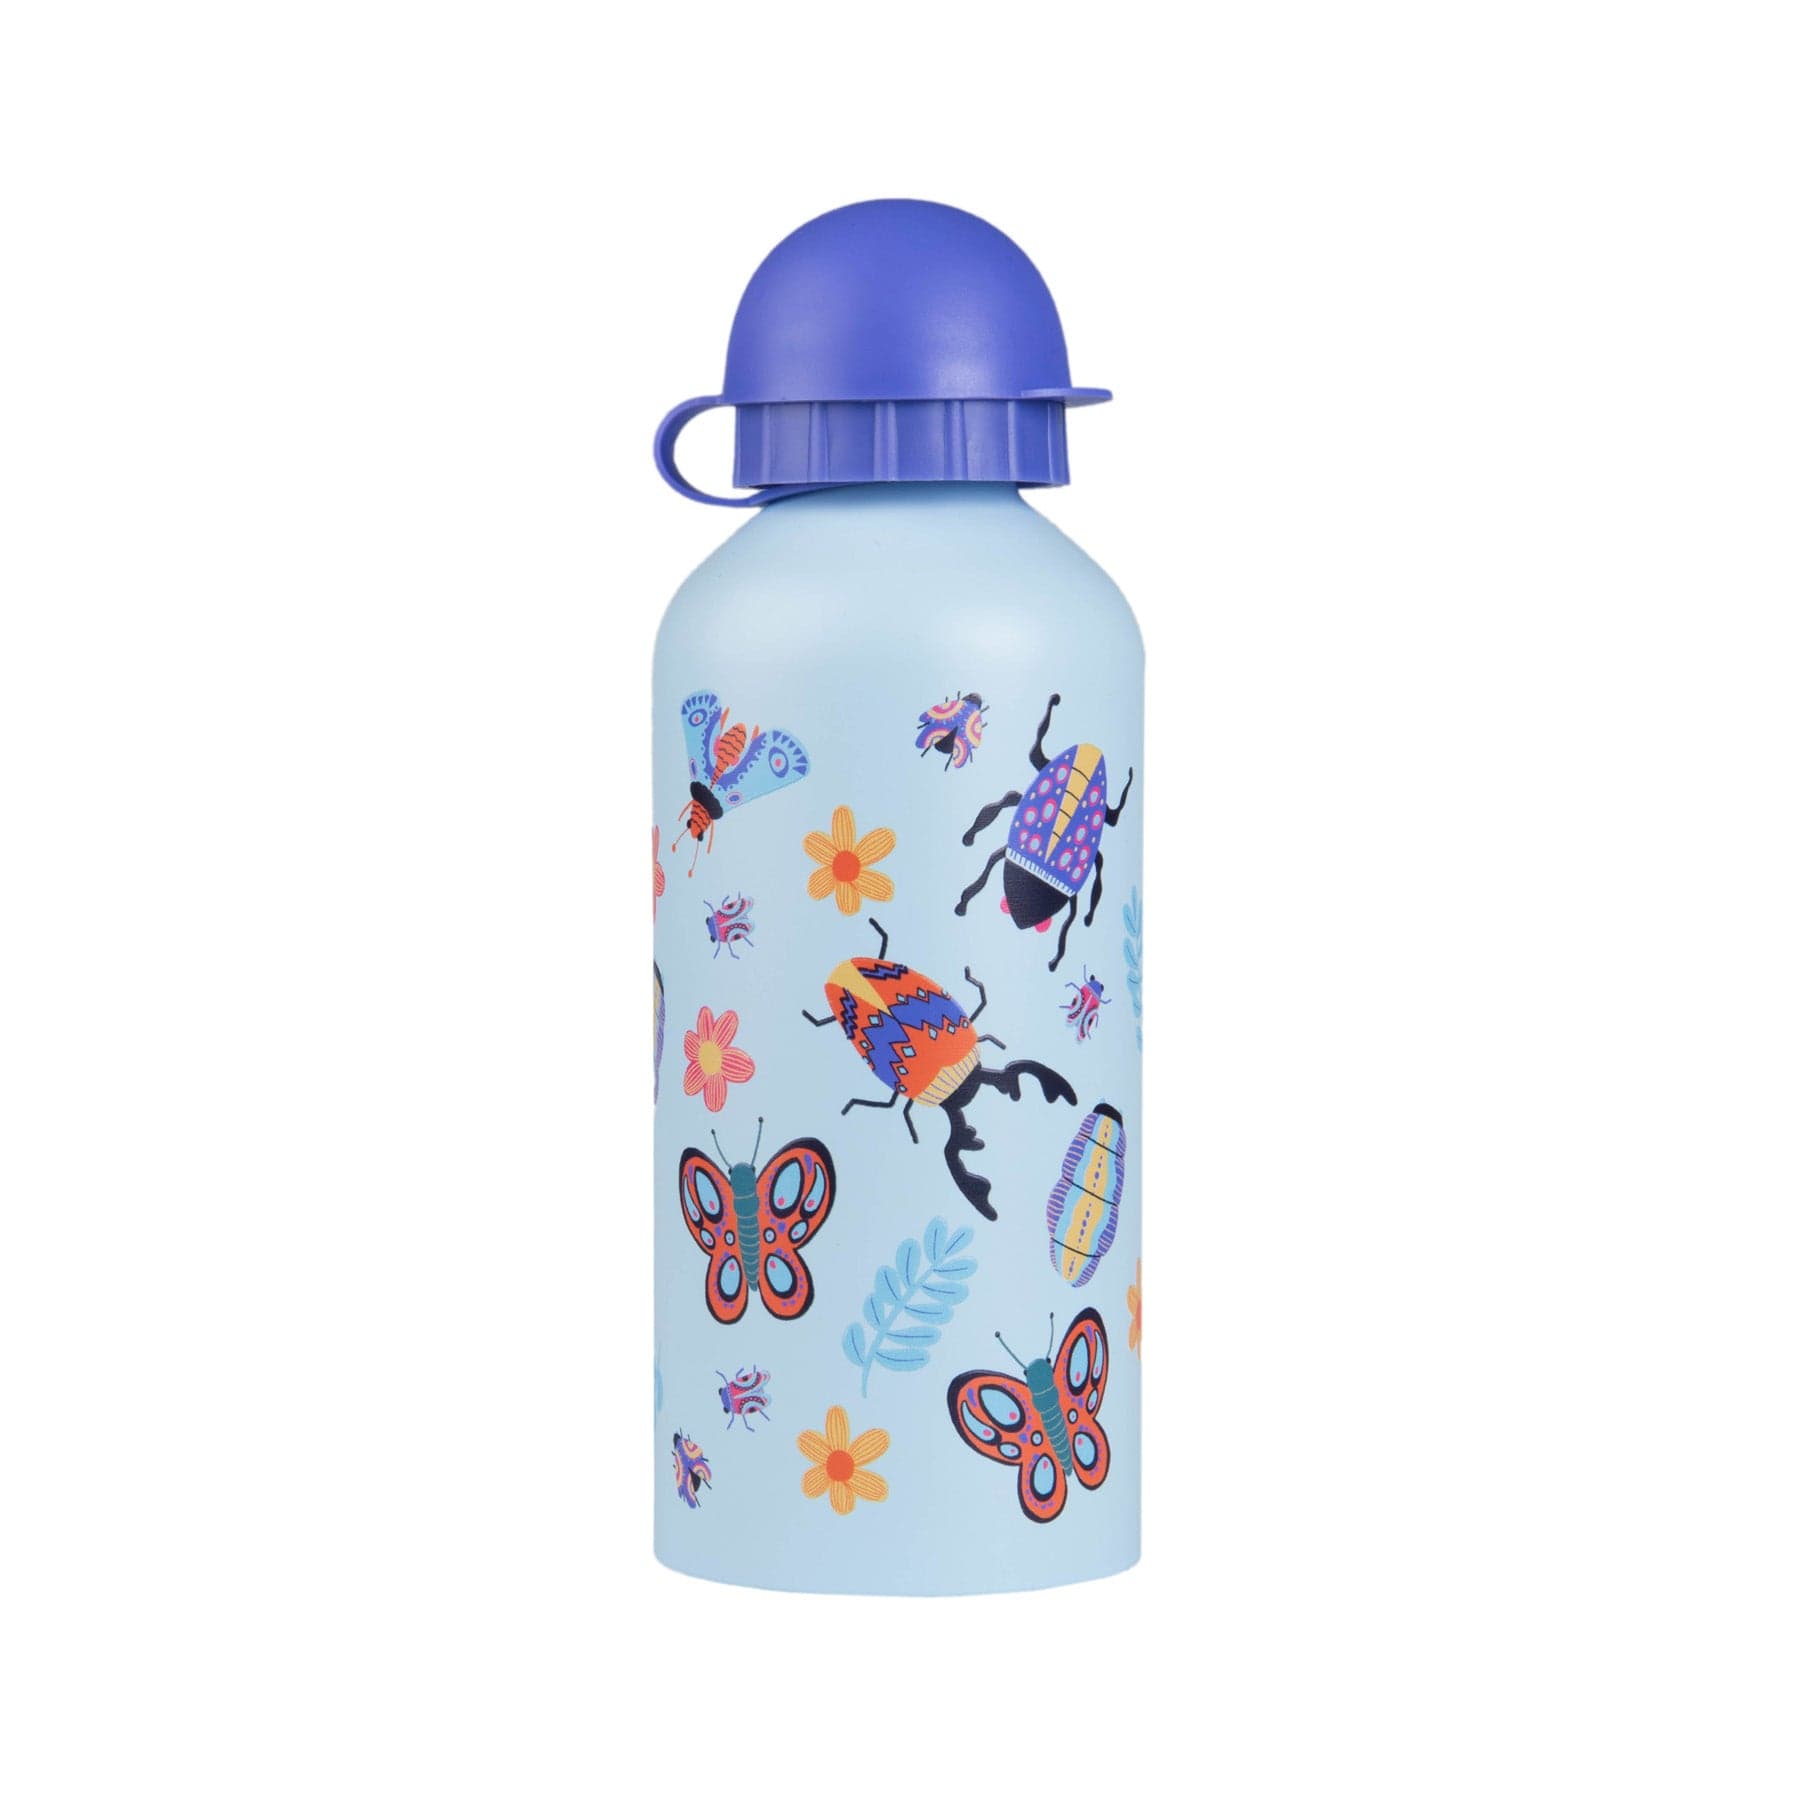 Blue reusable water bottle with playful insect and flower design, featuring butterflies, bees, and ladybugs on light blue background with purple cap.